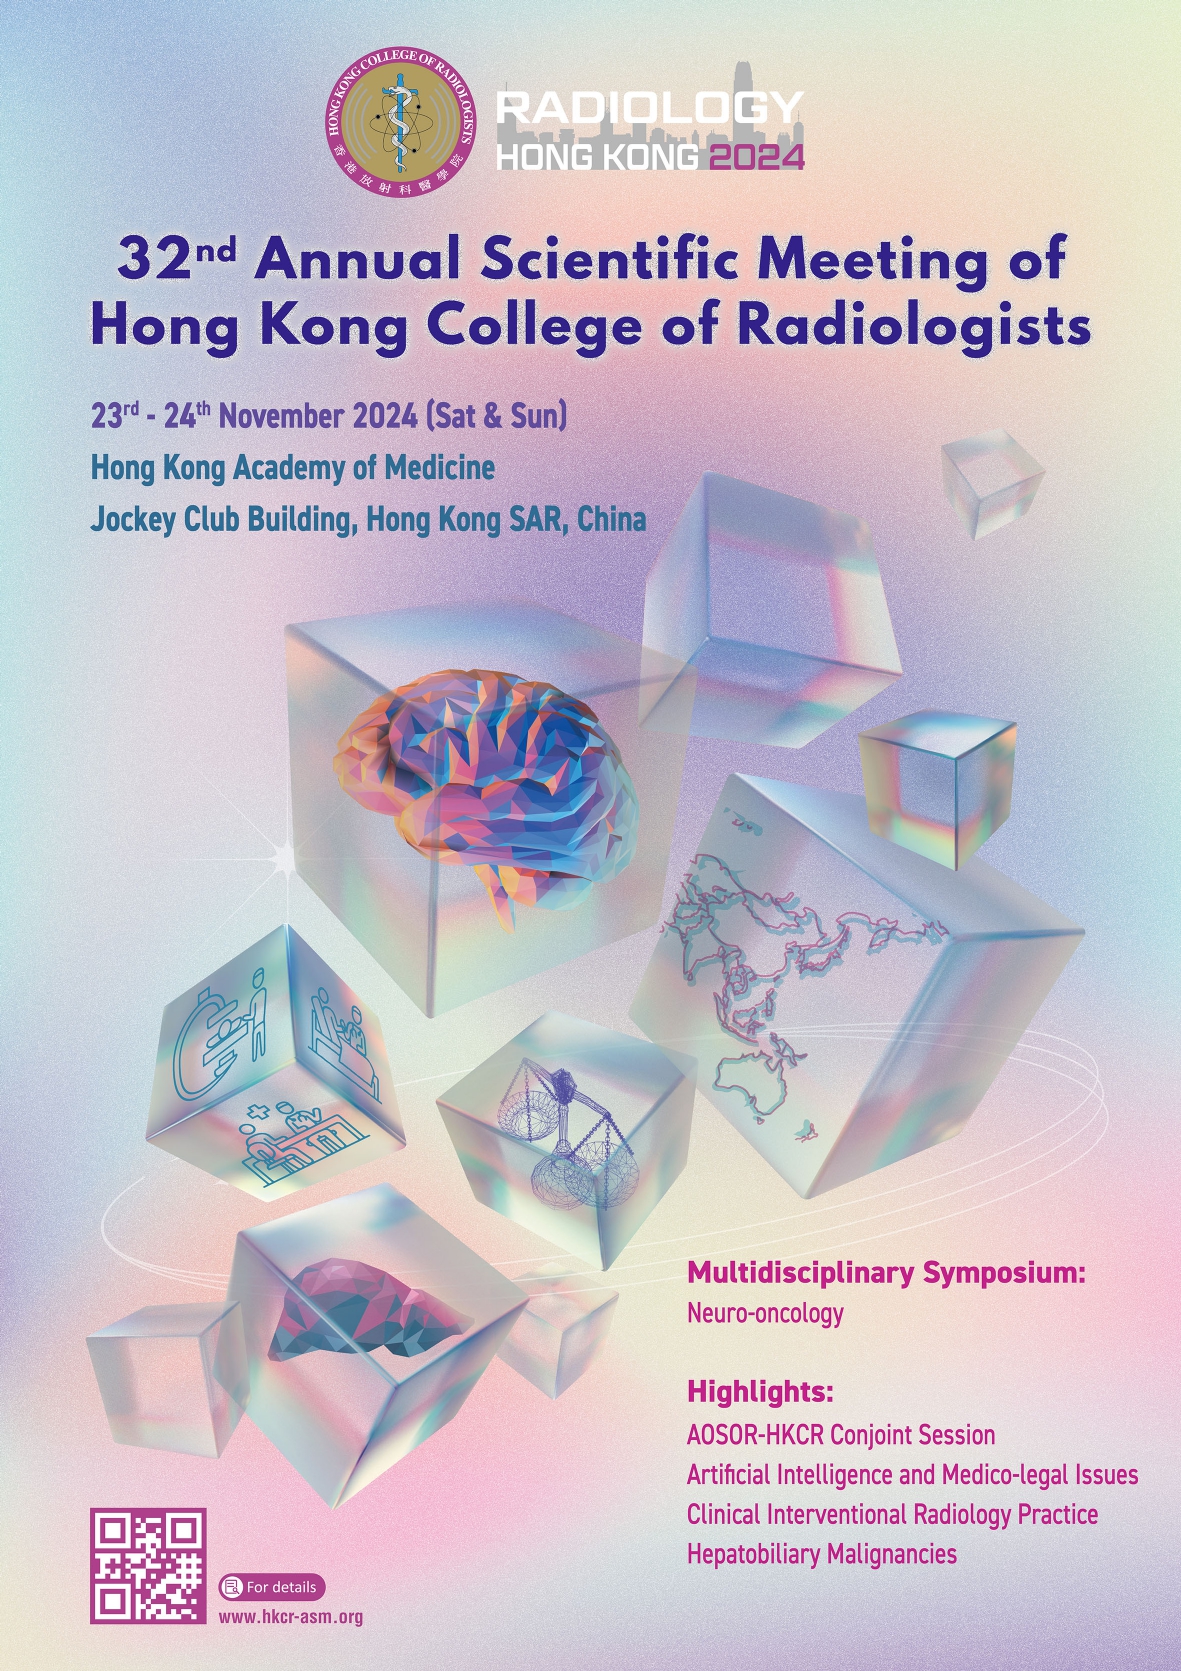 32nd Annual Scientific Meeting of Hong Kong College of Radiologists